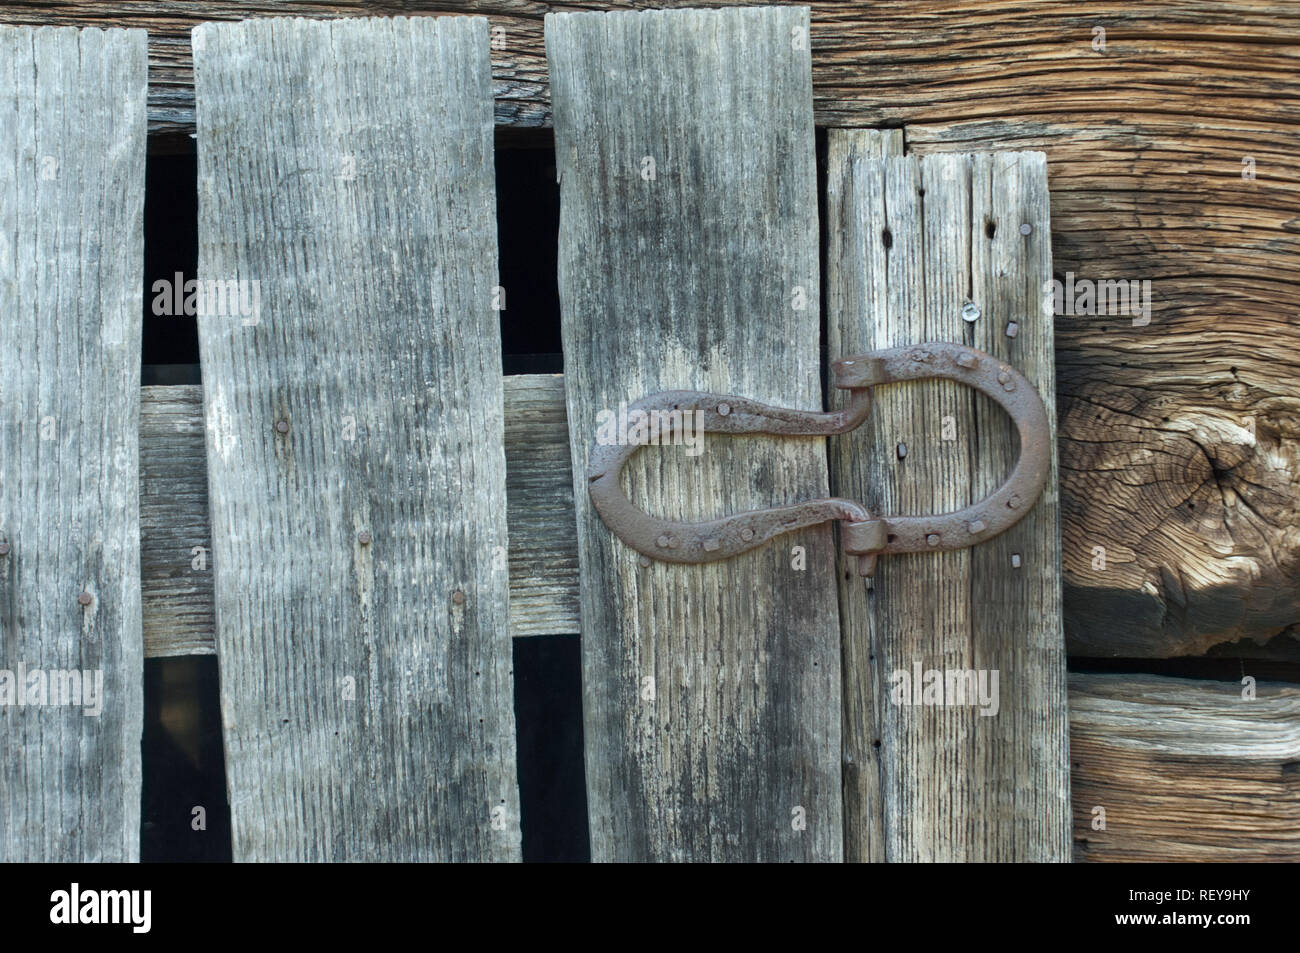 Handmade hinges made of horseshoes, Great Smoky Mountains National Park, border of NC and TN. Digital photograph Stock Photo